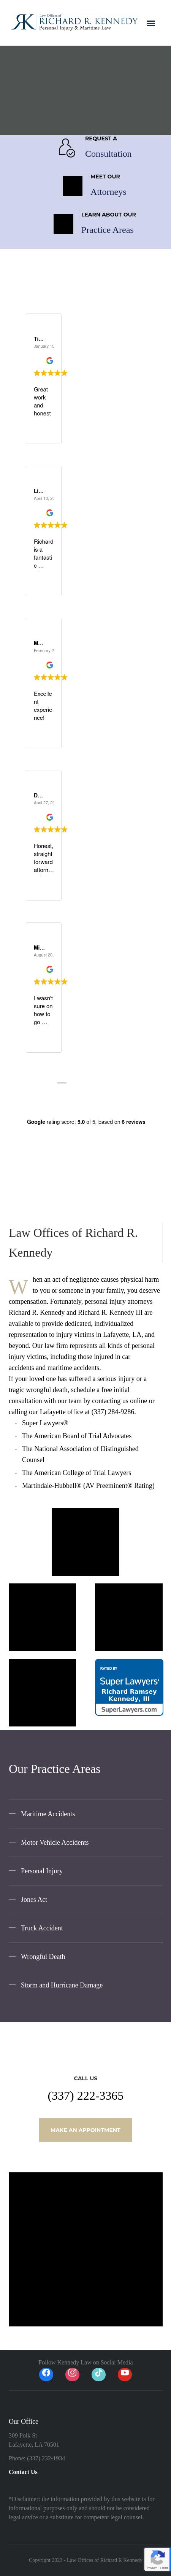 The Law Offices of Richard R. Kennedy, APLC - Lafayette LA Lawyers